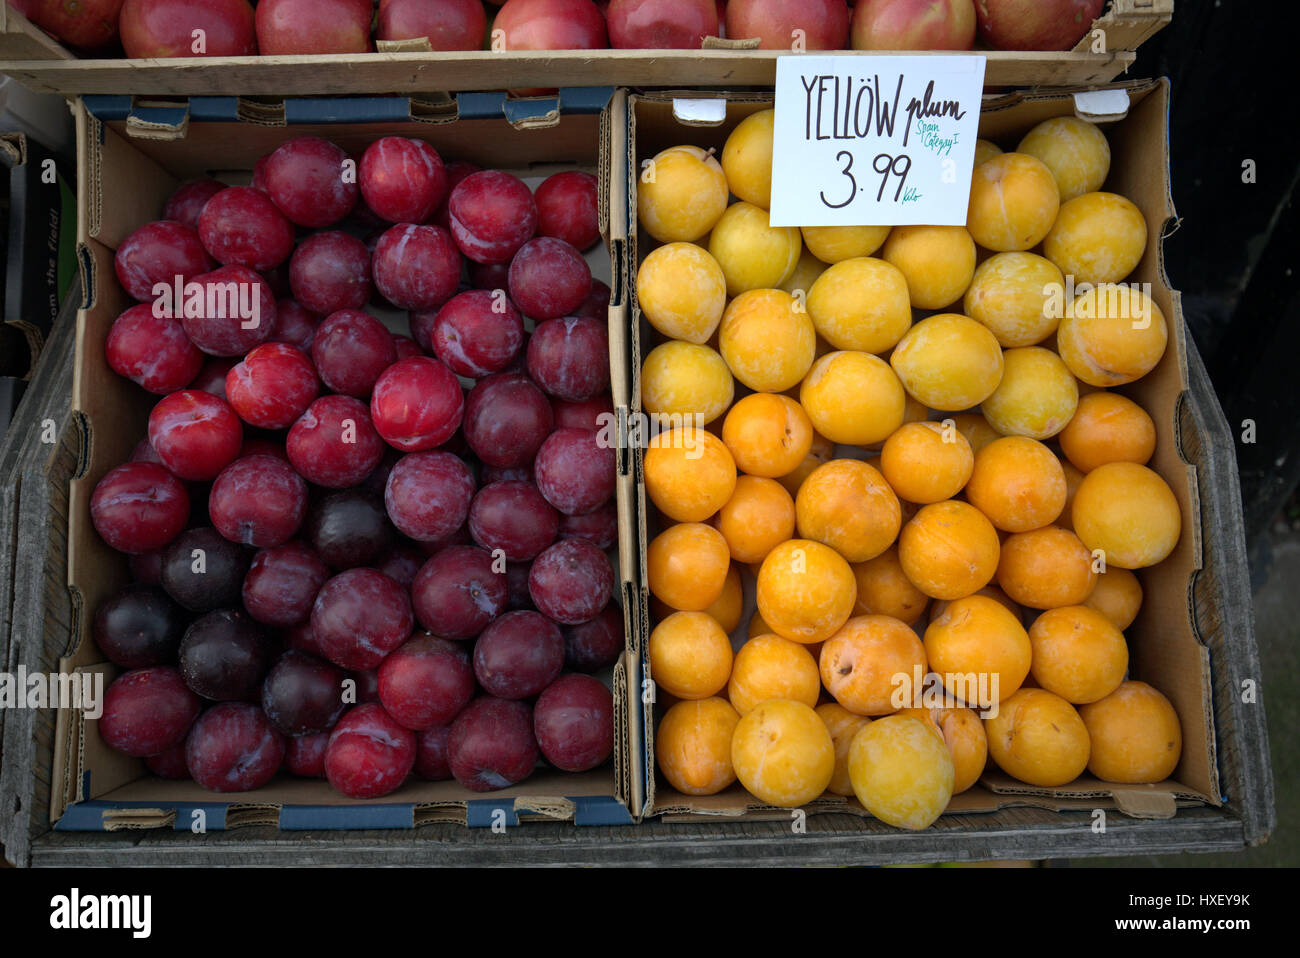 fruit and vegetable stall red and yellow plums organic Stock Photo